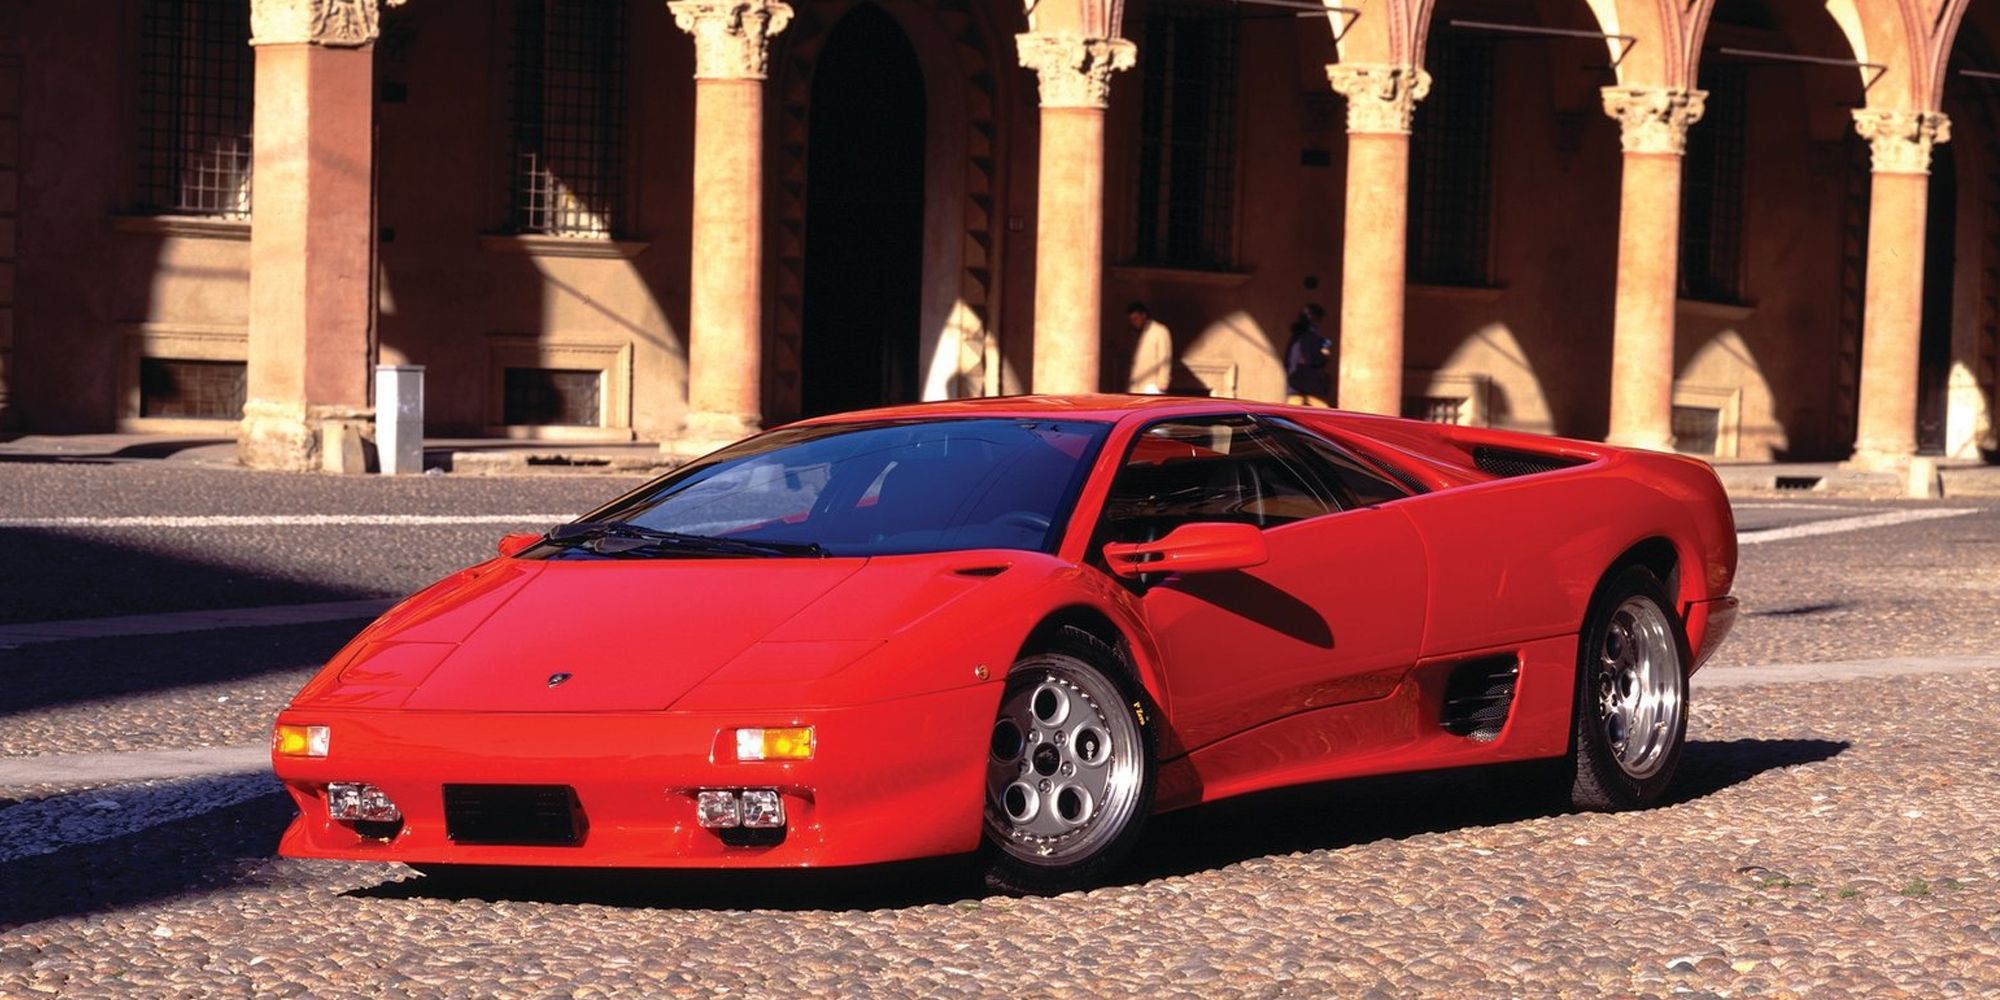 Front 3/4 view of a red Diablo on a square